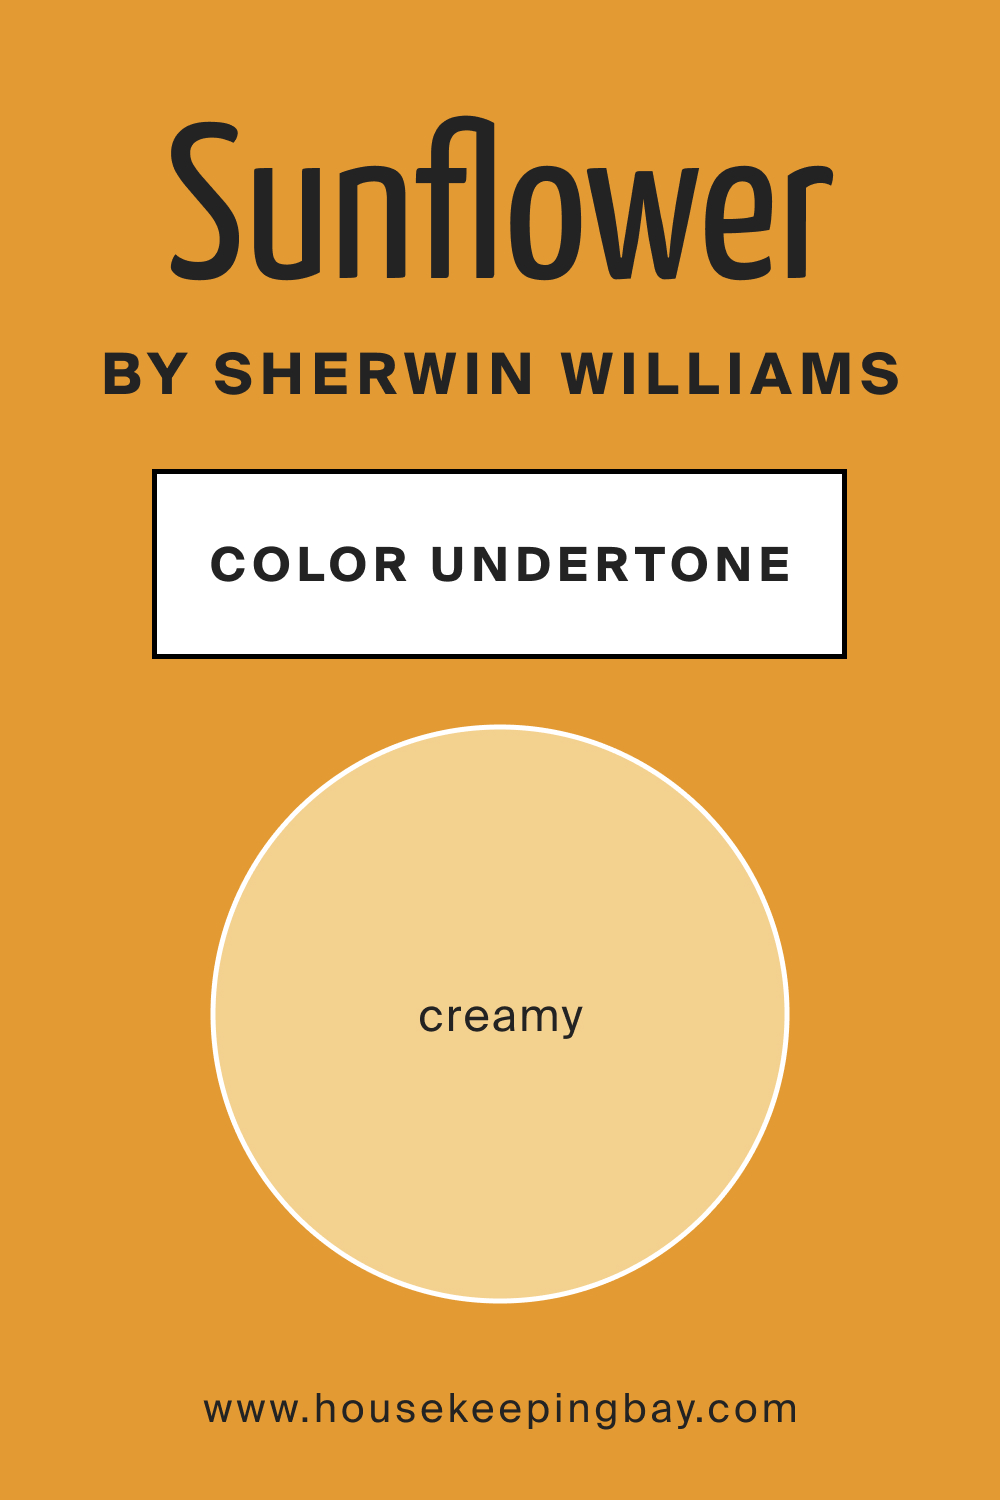 Sunflower SW 6678 by Sherwin Williams Color Undertone